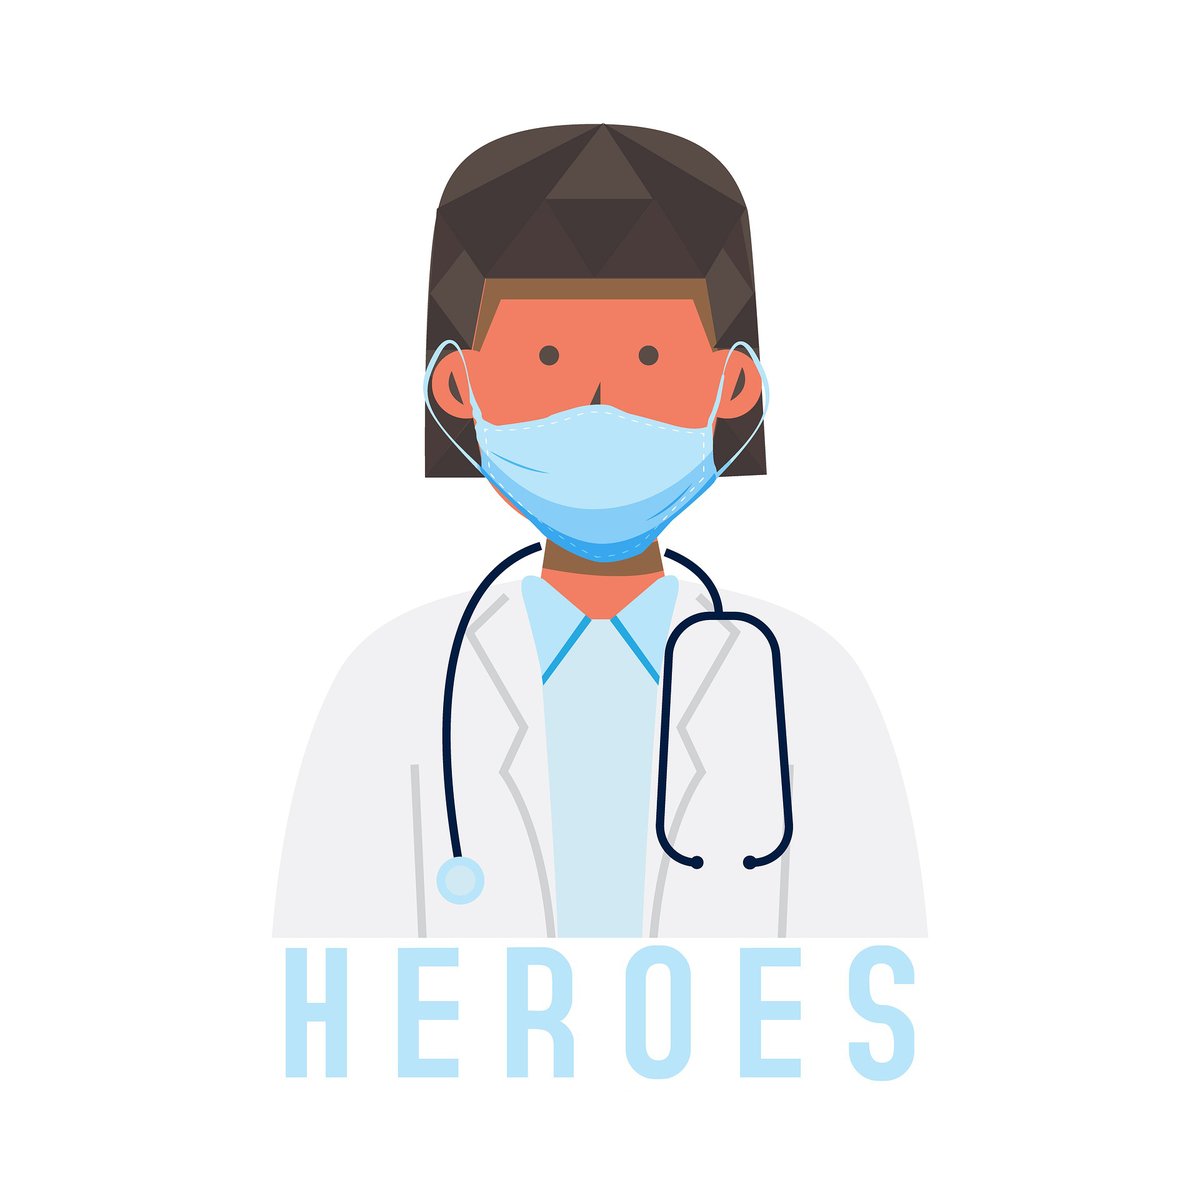 It's Public Health Thank You Day. Thank you to our public health professionals who work tirelessly every day to protect the health of all people and all communities. #PHTYD #PublicHealthHeroes